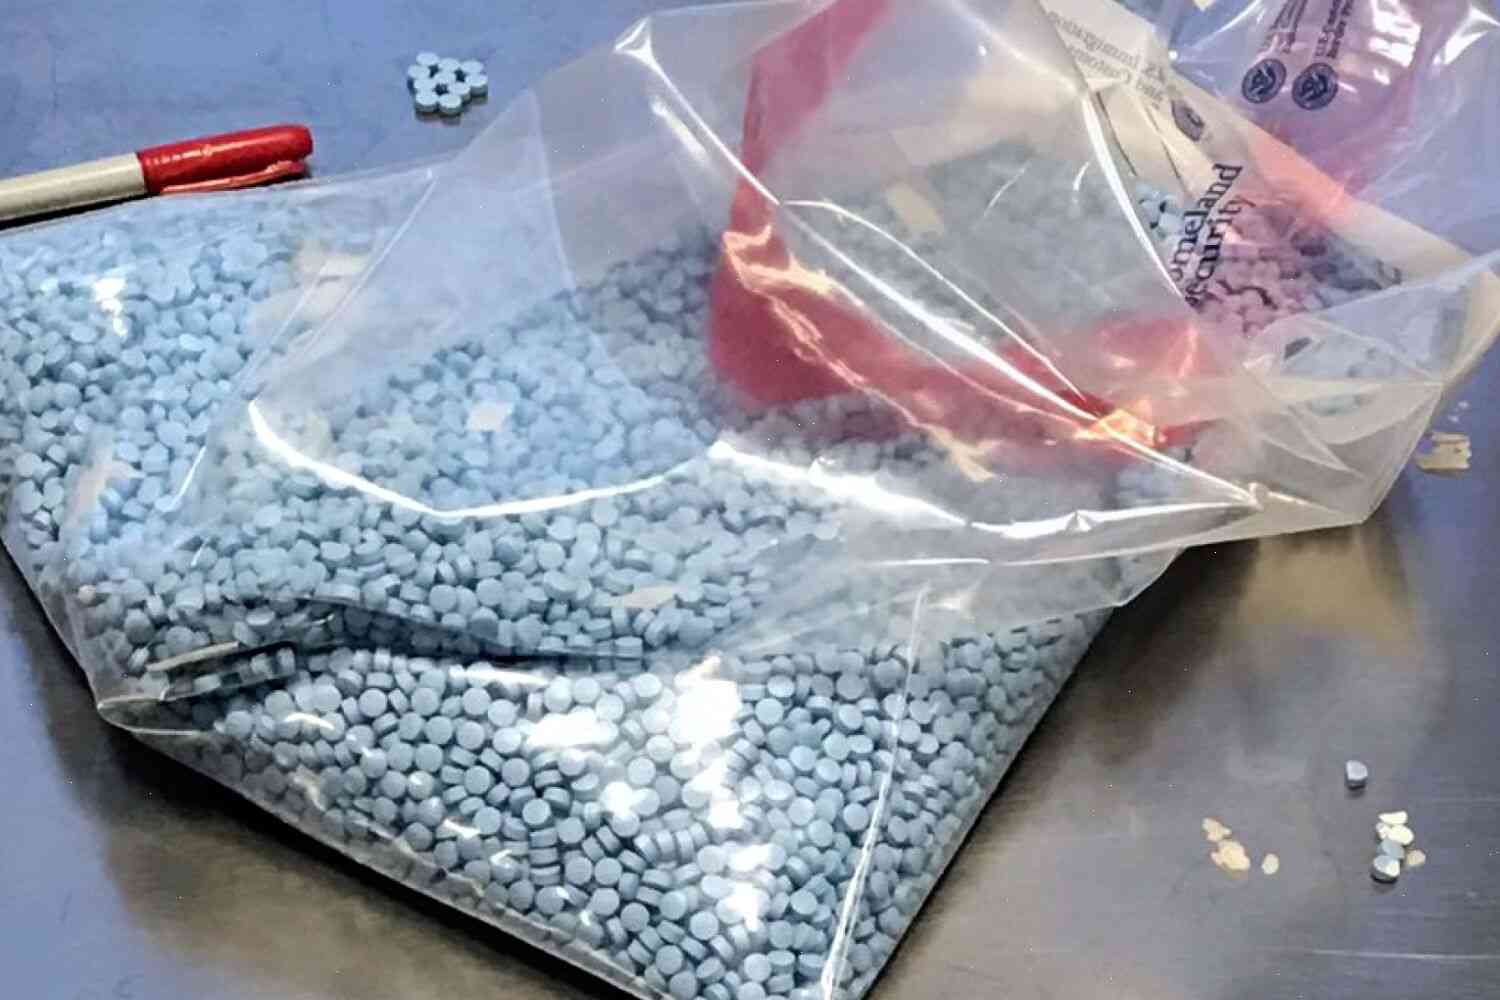 Heroin, fentanyl and other opiates are being mixed with fentanyl and methamphetamine, U.S. Attorney says